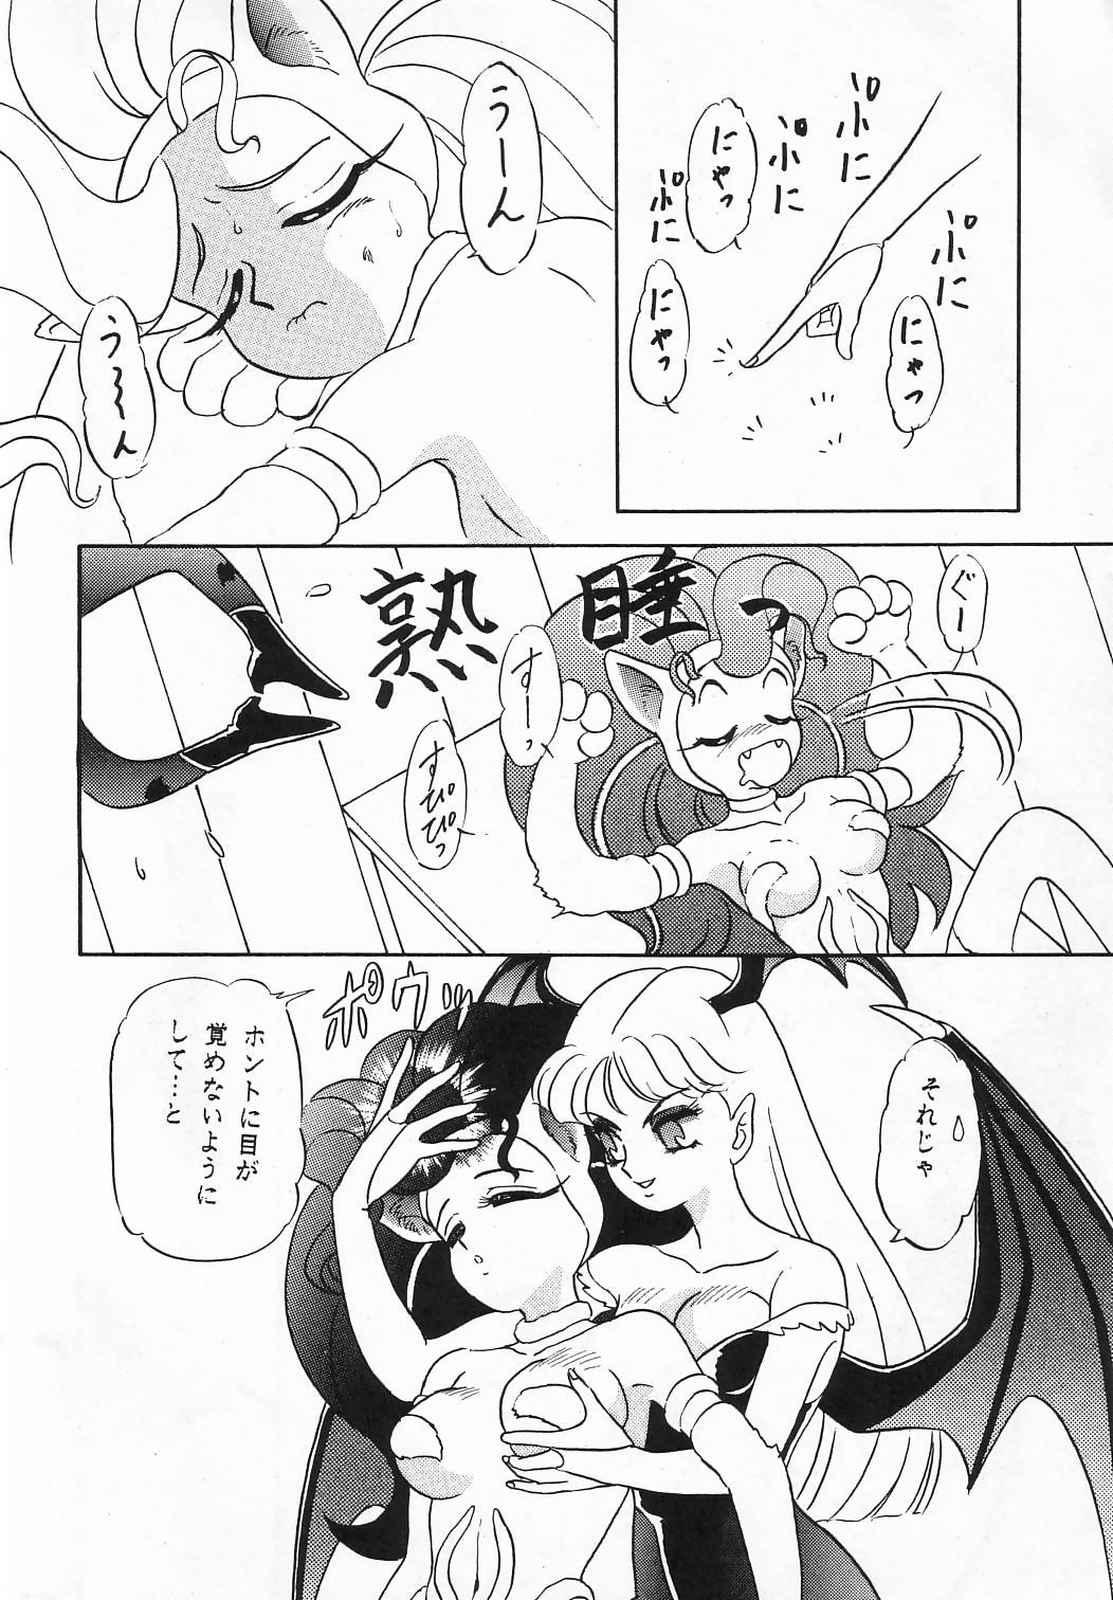 Bigdick Lunch Box 10 - Lunch Time 2 - Sailor moon Darkstalkers Wives - Page 8